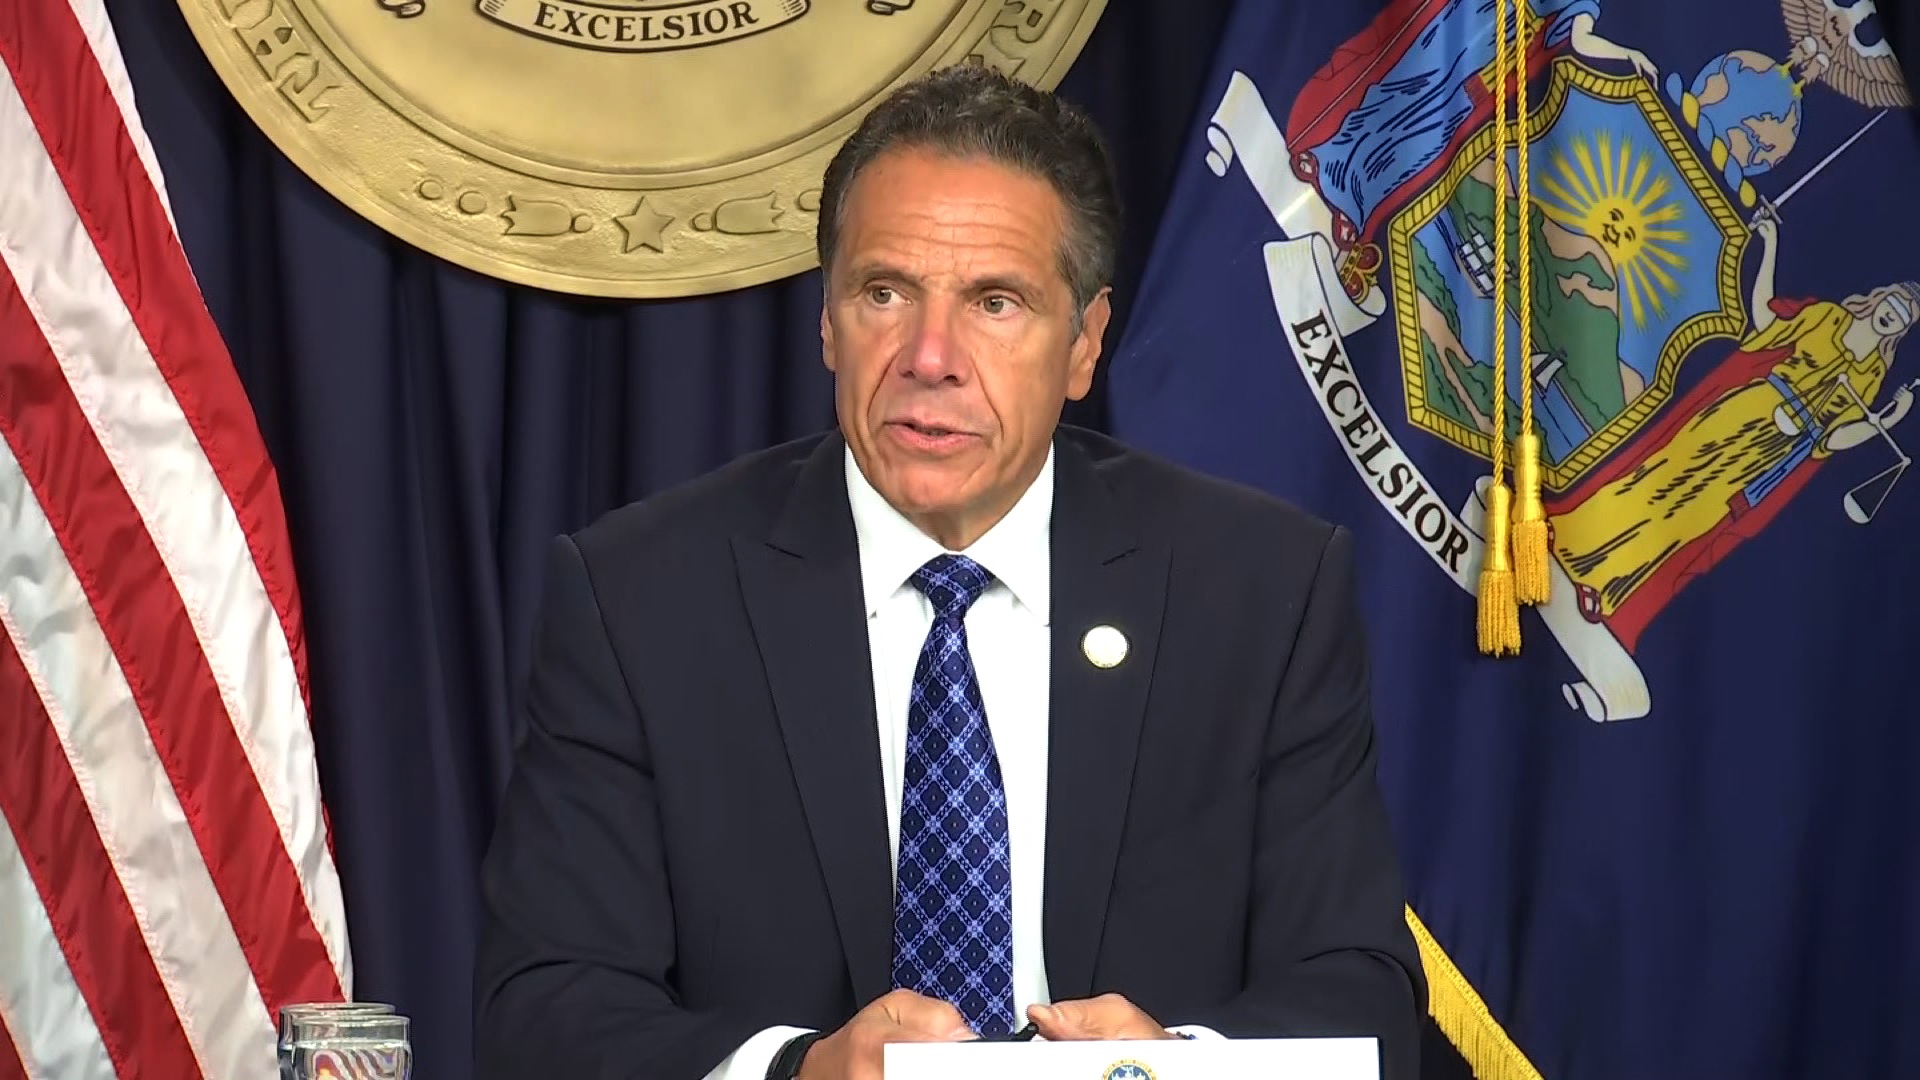 New York Gov. Andrew Cuomo speaks during a press briefing in New York City on August 17.